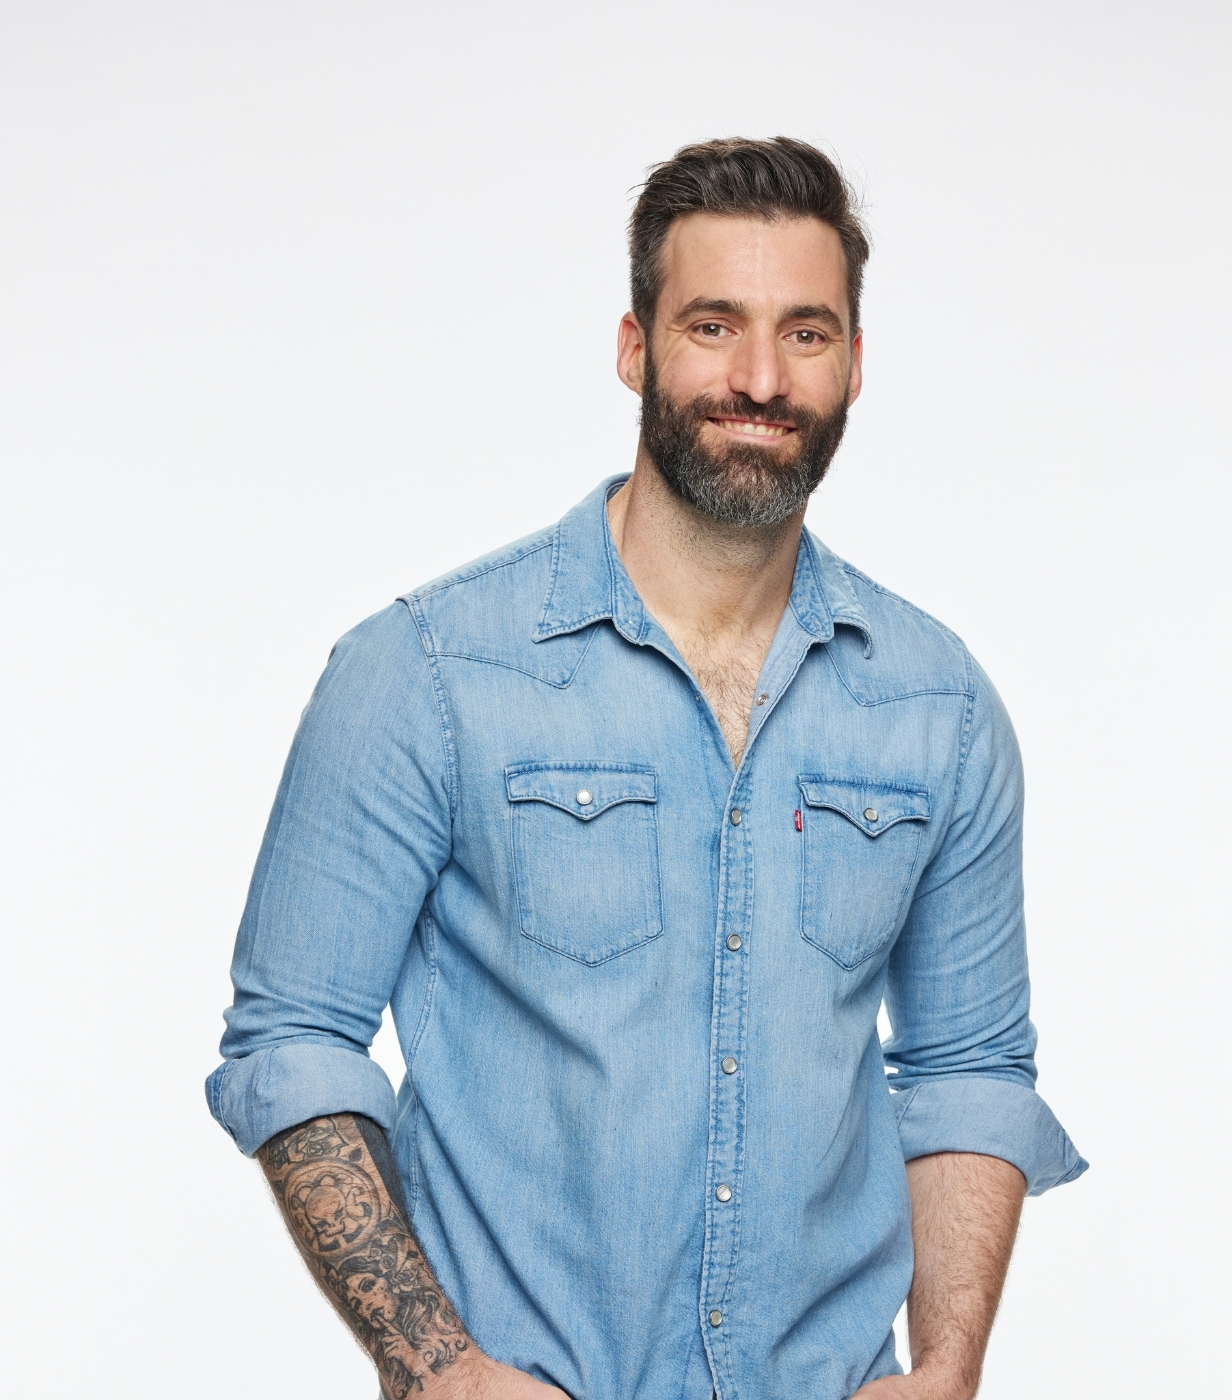 Here's All of The Married at First Sight 2022 Contestants Who Are Actors